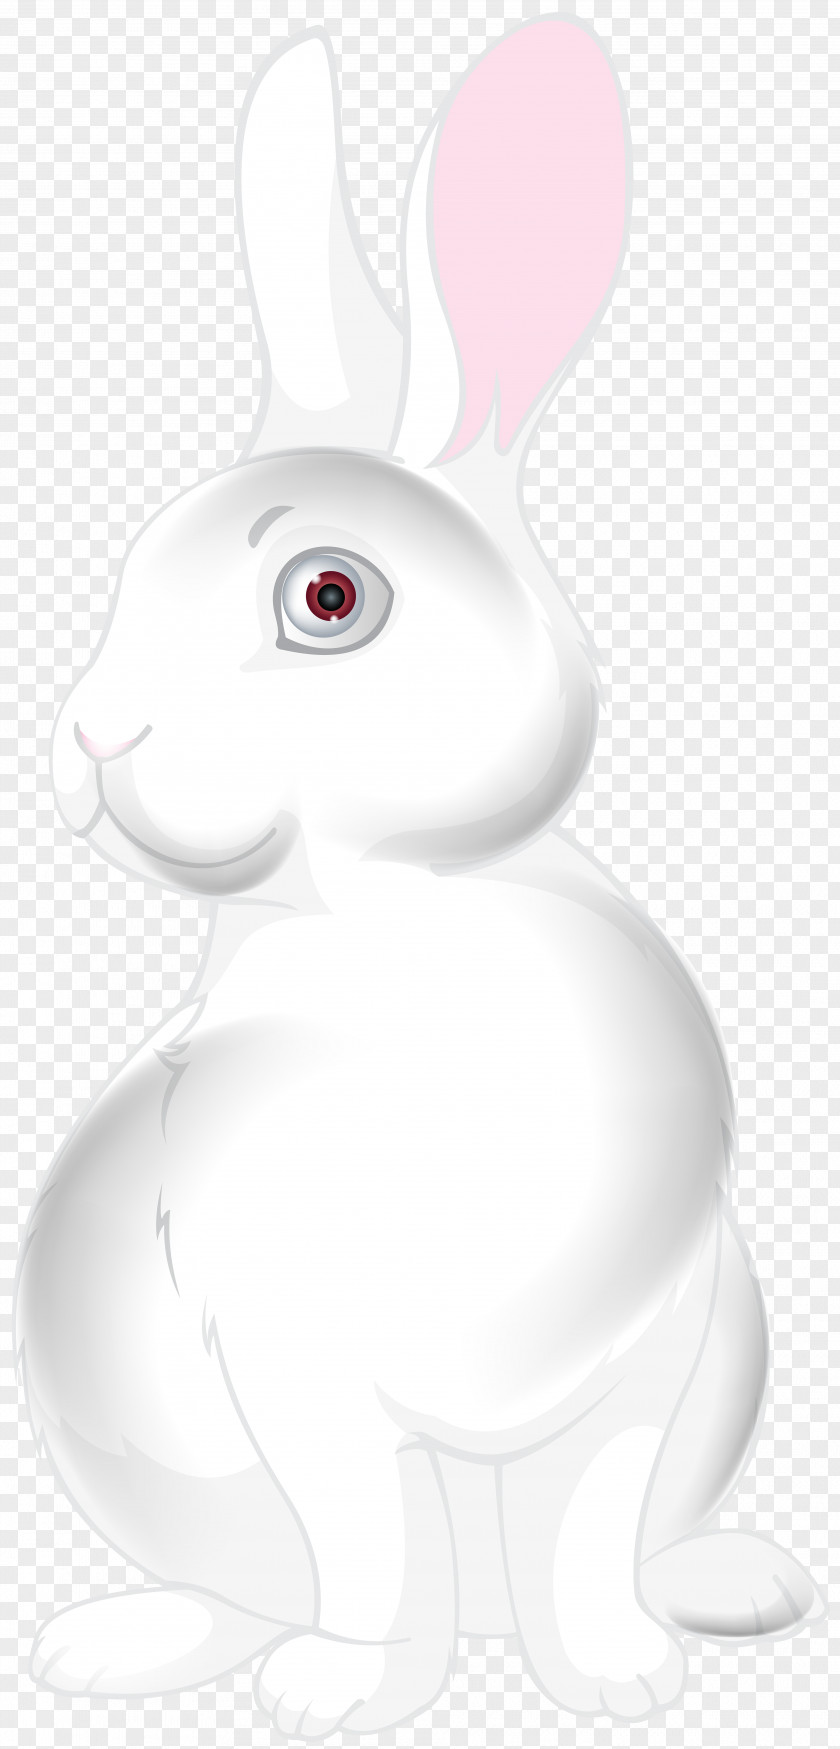 White Bunny Cartoon Clip Art Image Domestic Rabbit Easter Hare PNG